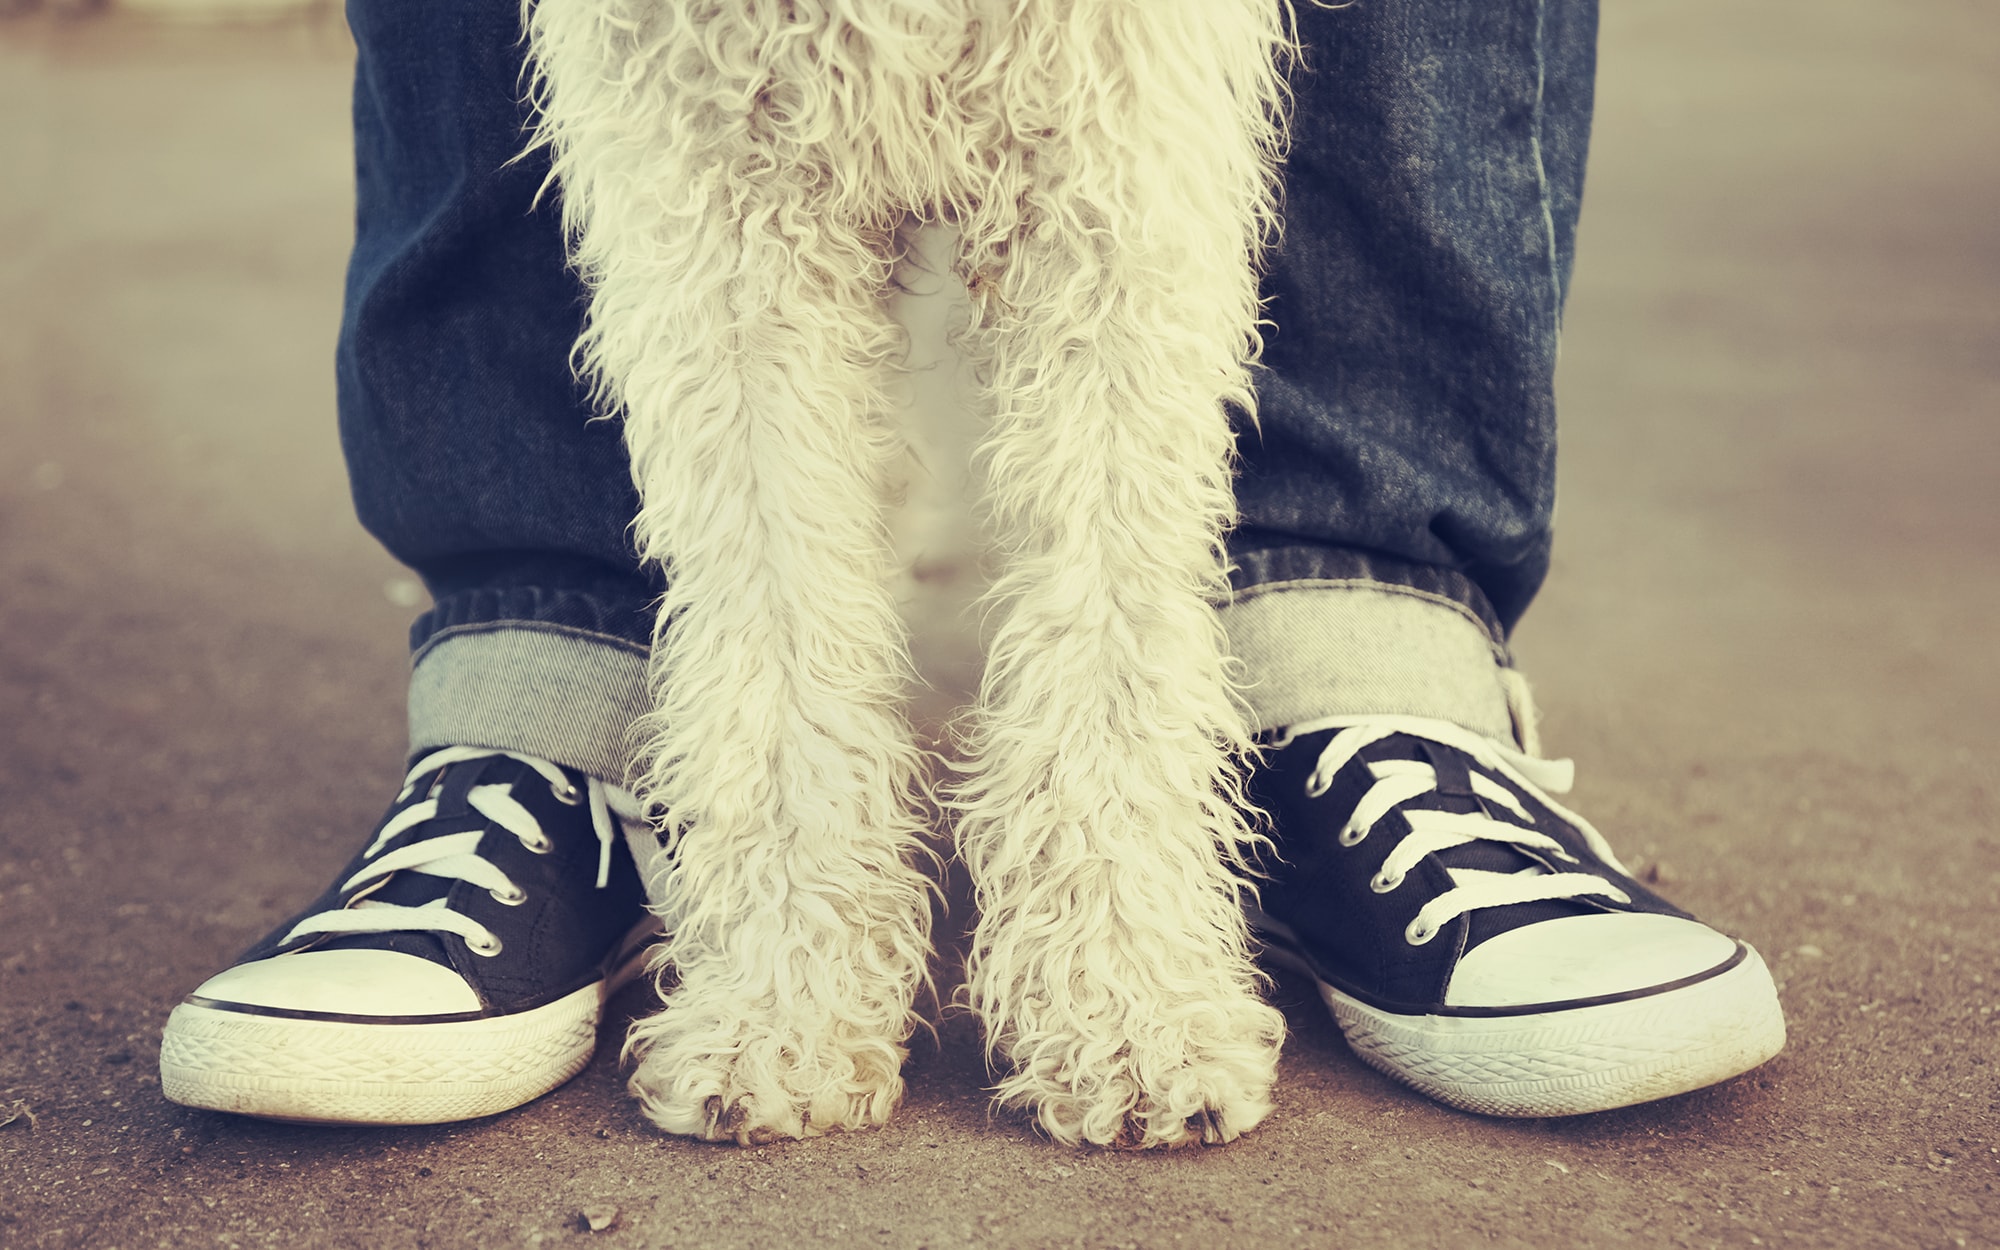 Small white dog standing between its owners feet